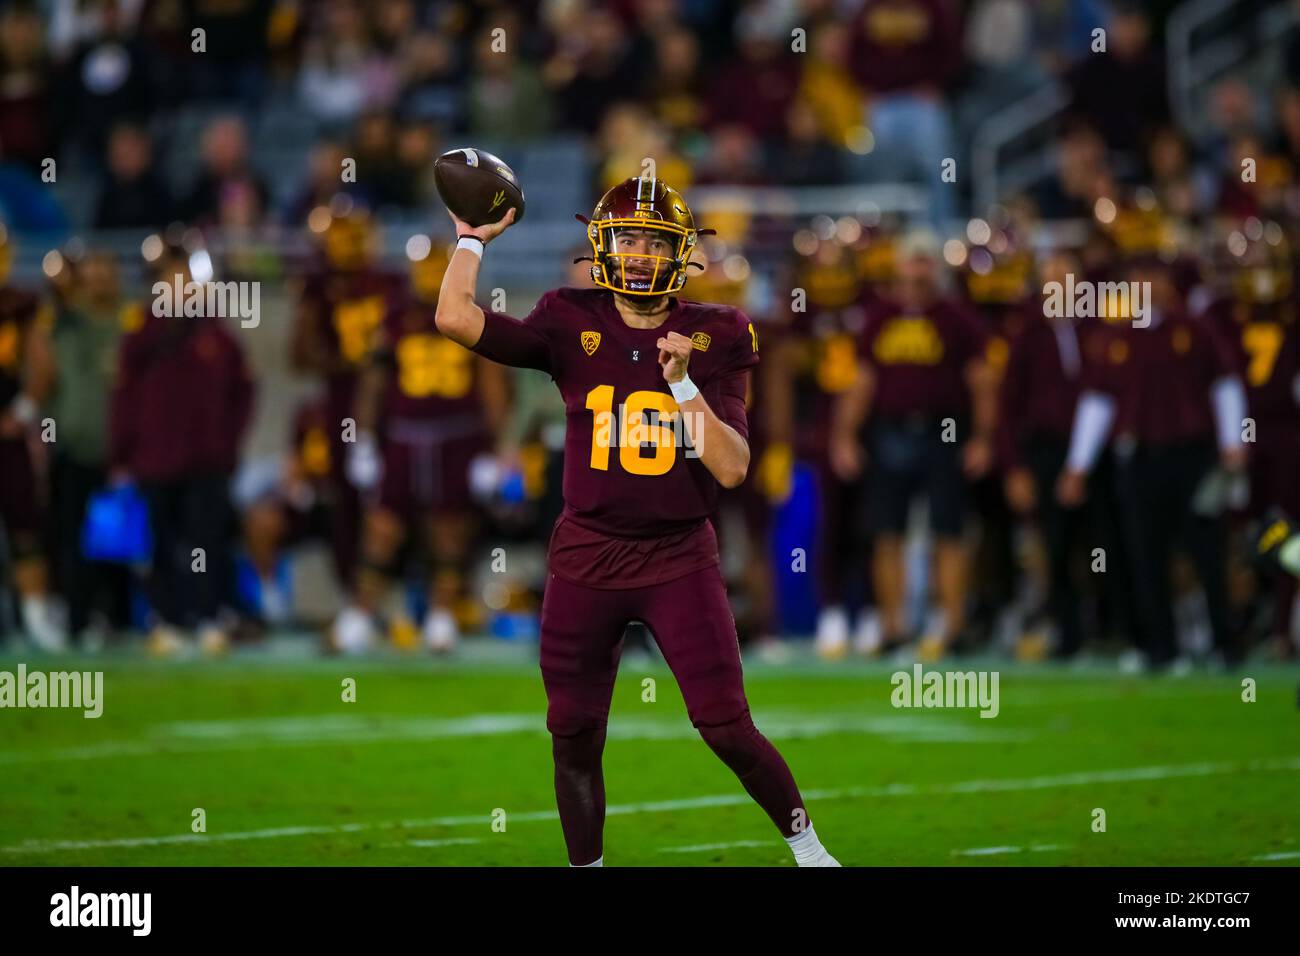 Arizona State returned home for the first time in a month to take on the #10 ranked UCLA Bruins with a 7-1 record heaing into Saturday night's game. A Stock Photo